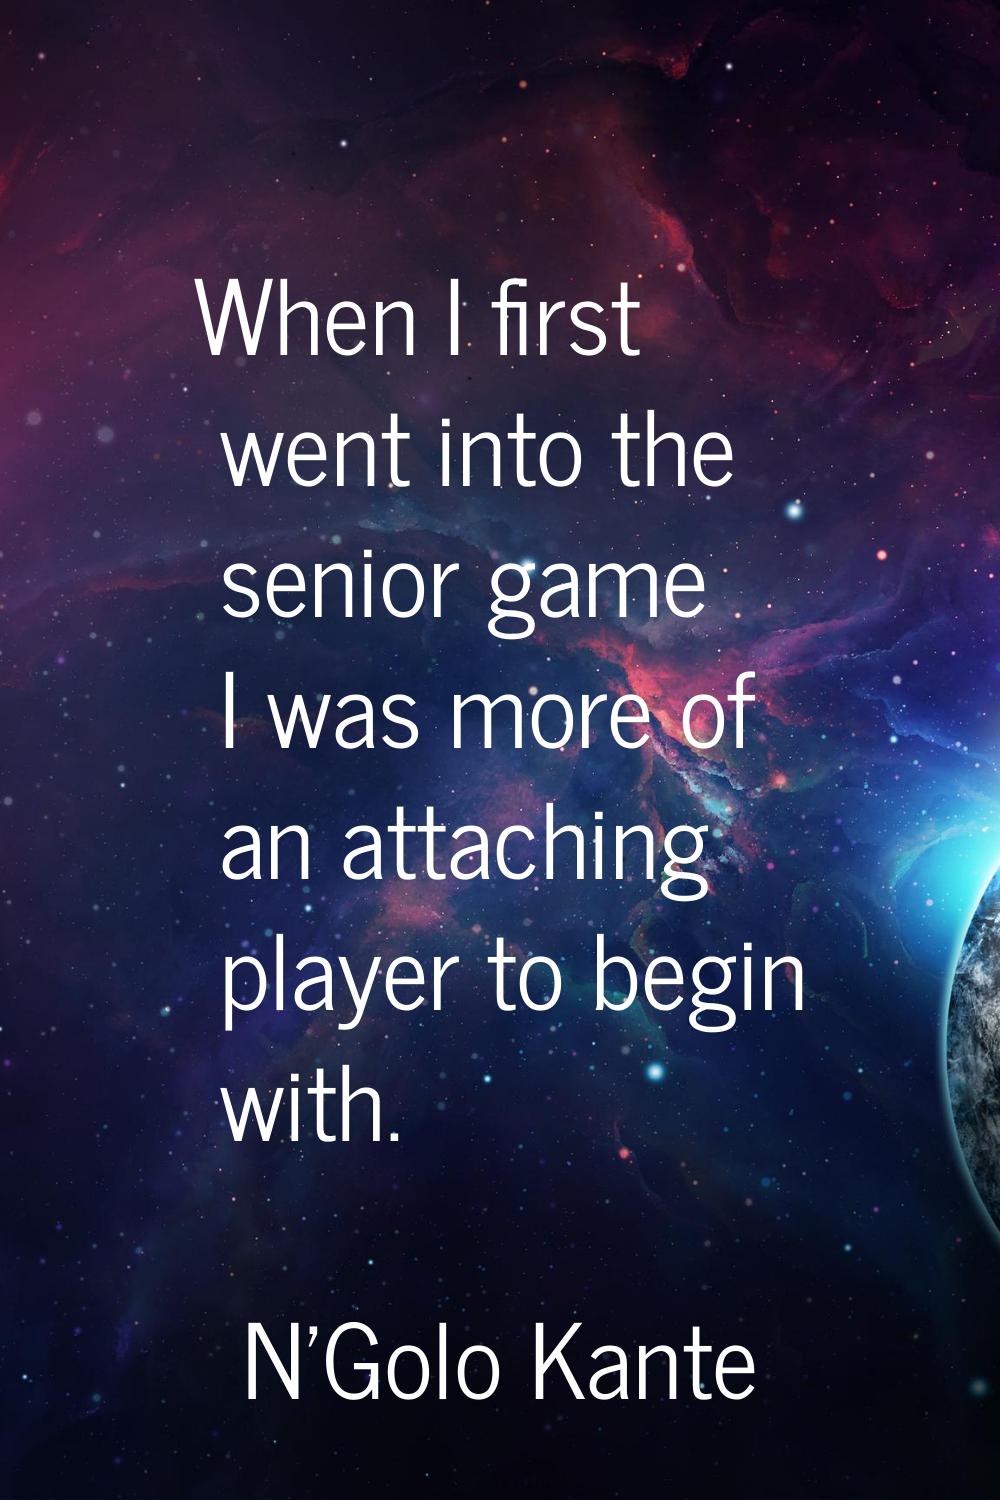 When I first went into the senior game I was more of an attaching player to begin with.